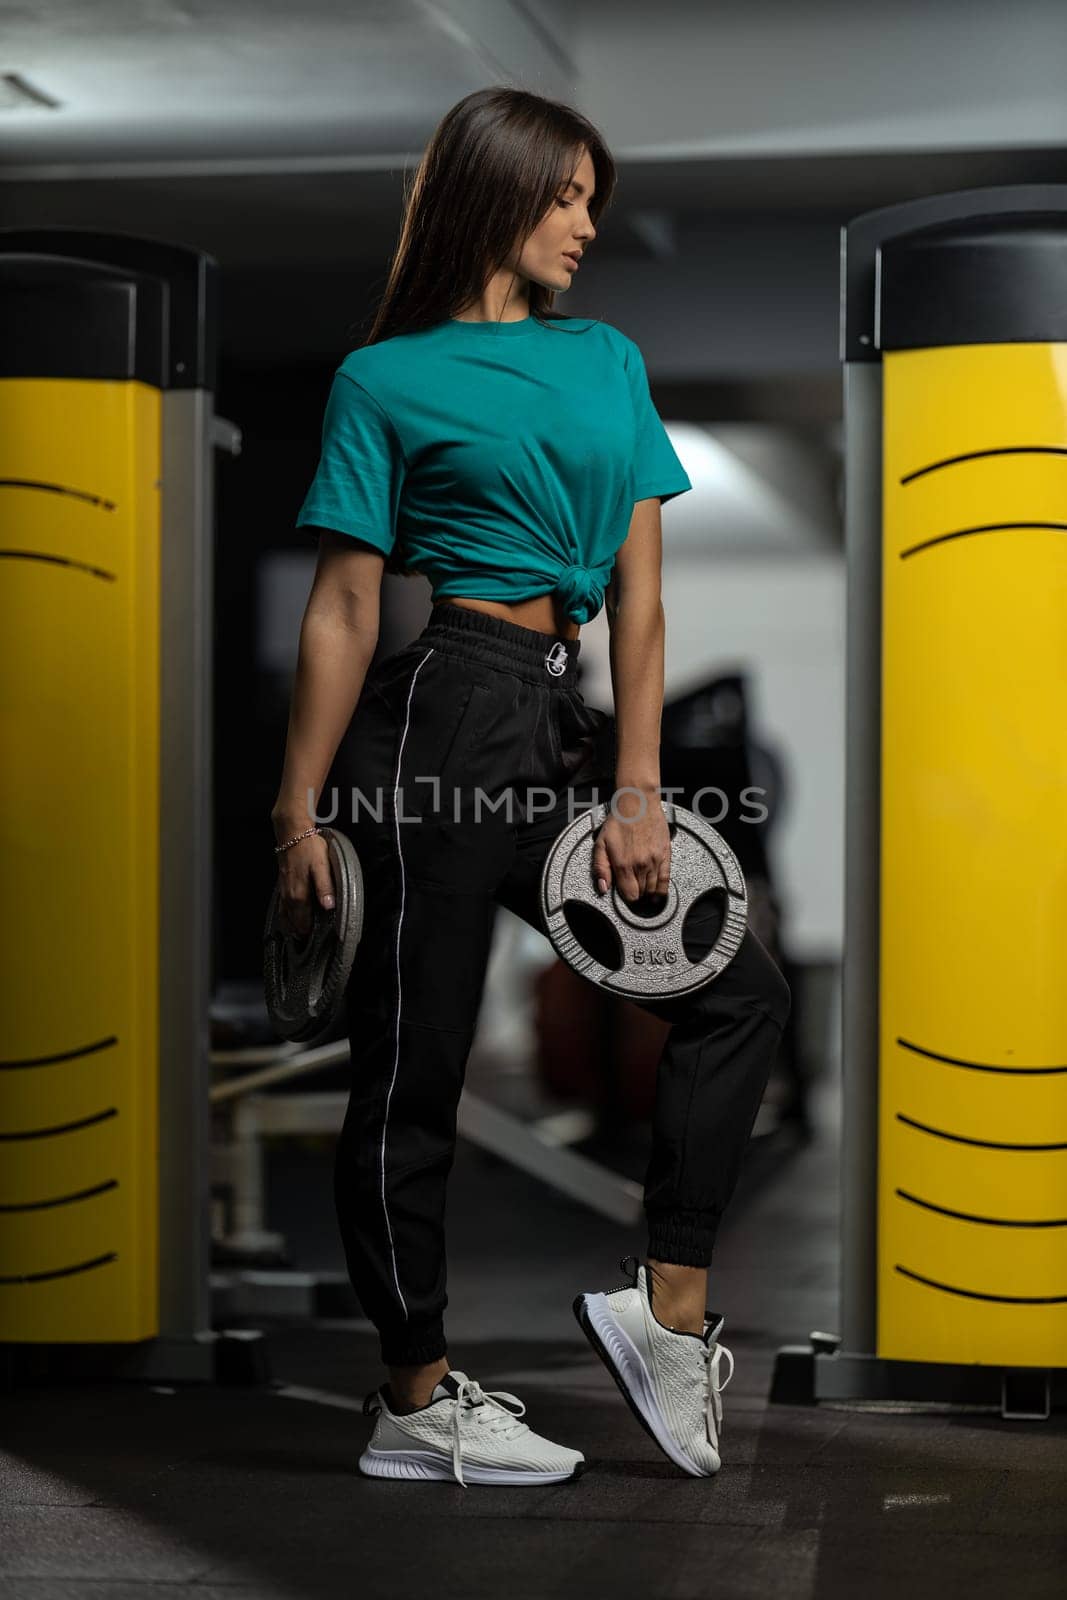 Beautiful sporty girl fitness model posing with weights in the gym by but_photo